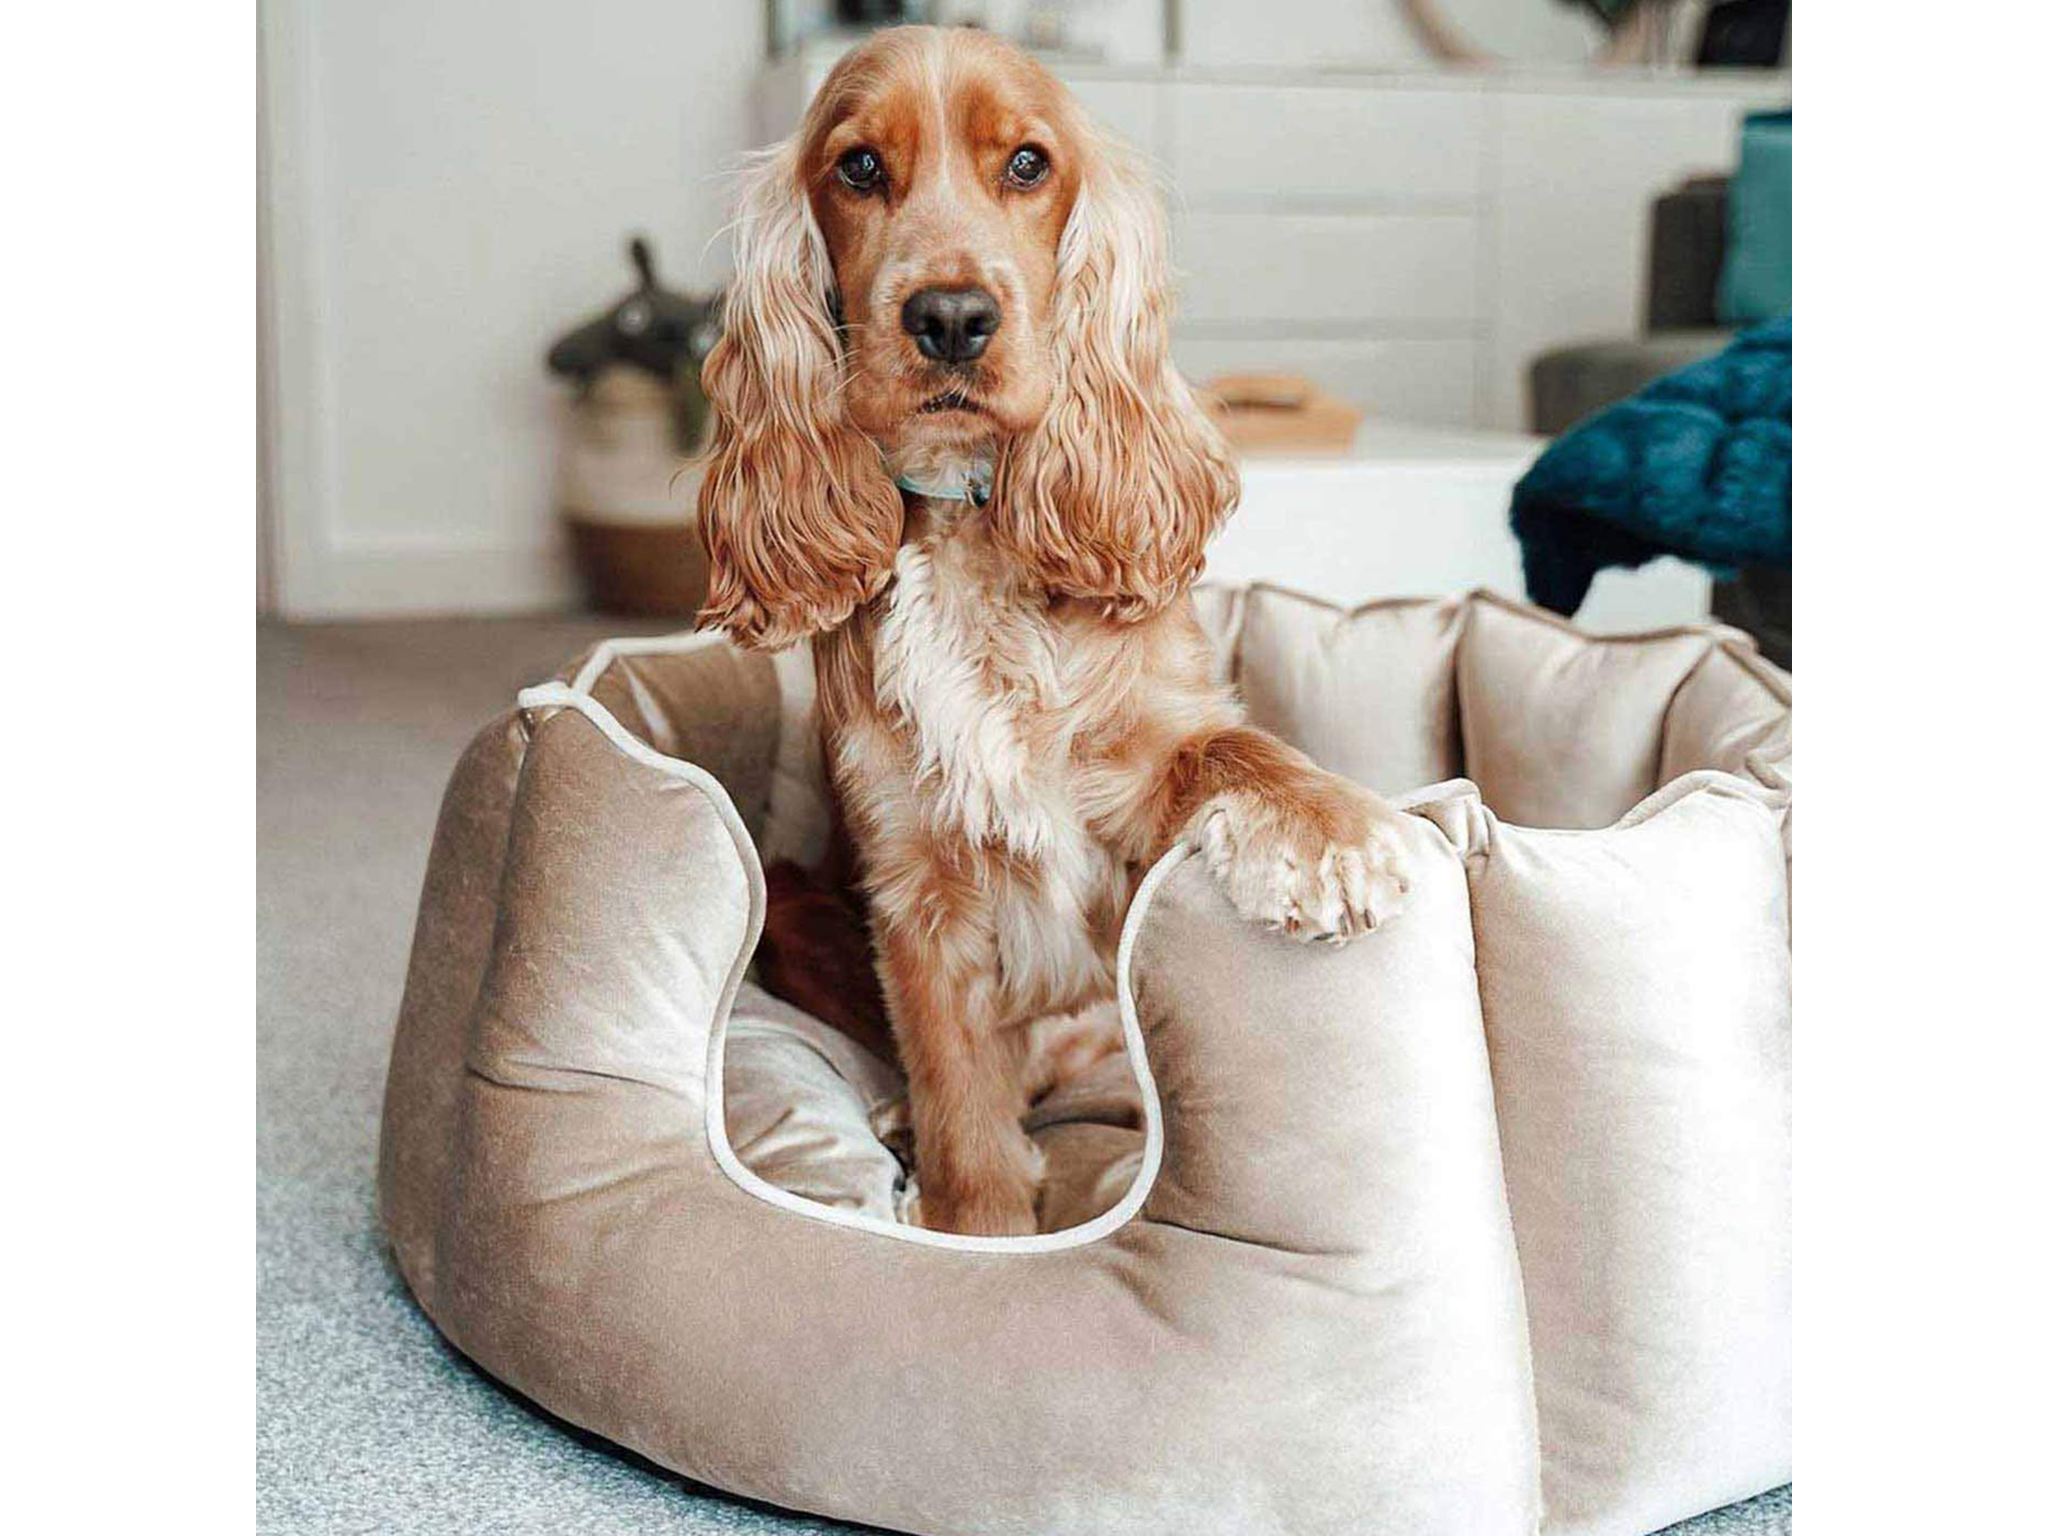 Mechanical Wash Sofa-Style Warm Soft Traditional Living Room Couch Pet Bed/Available in Multiple Colors & Styles BYHBU Pet Dog Bed 